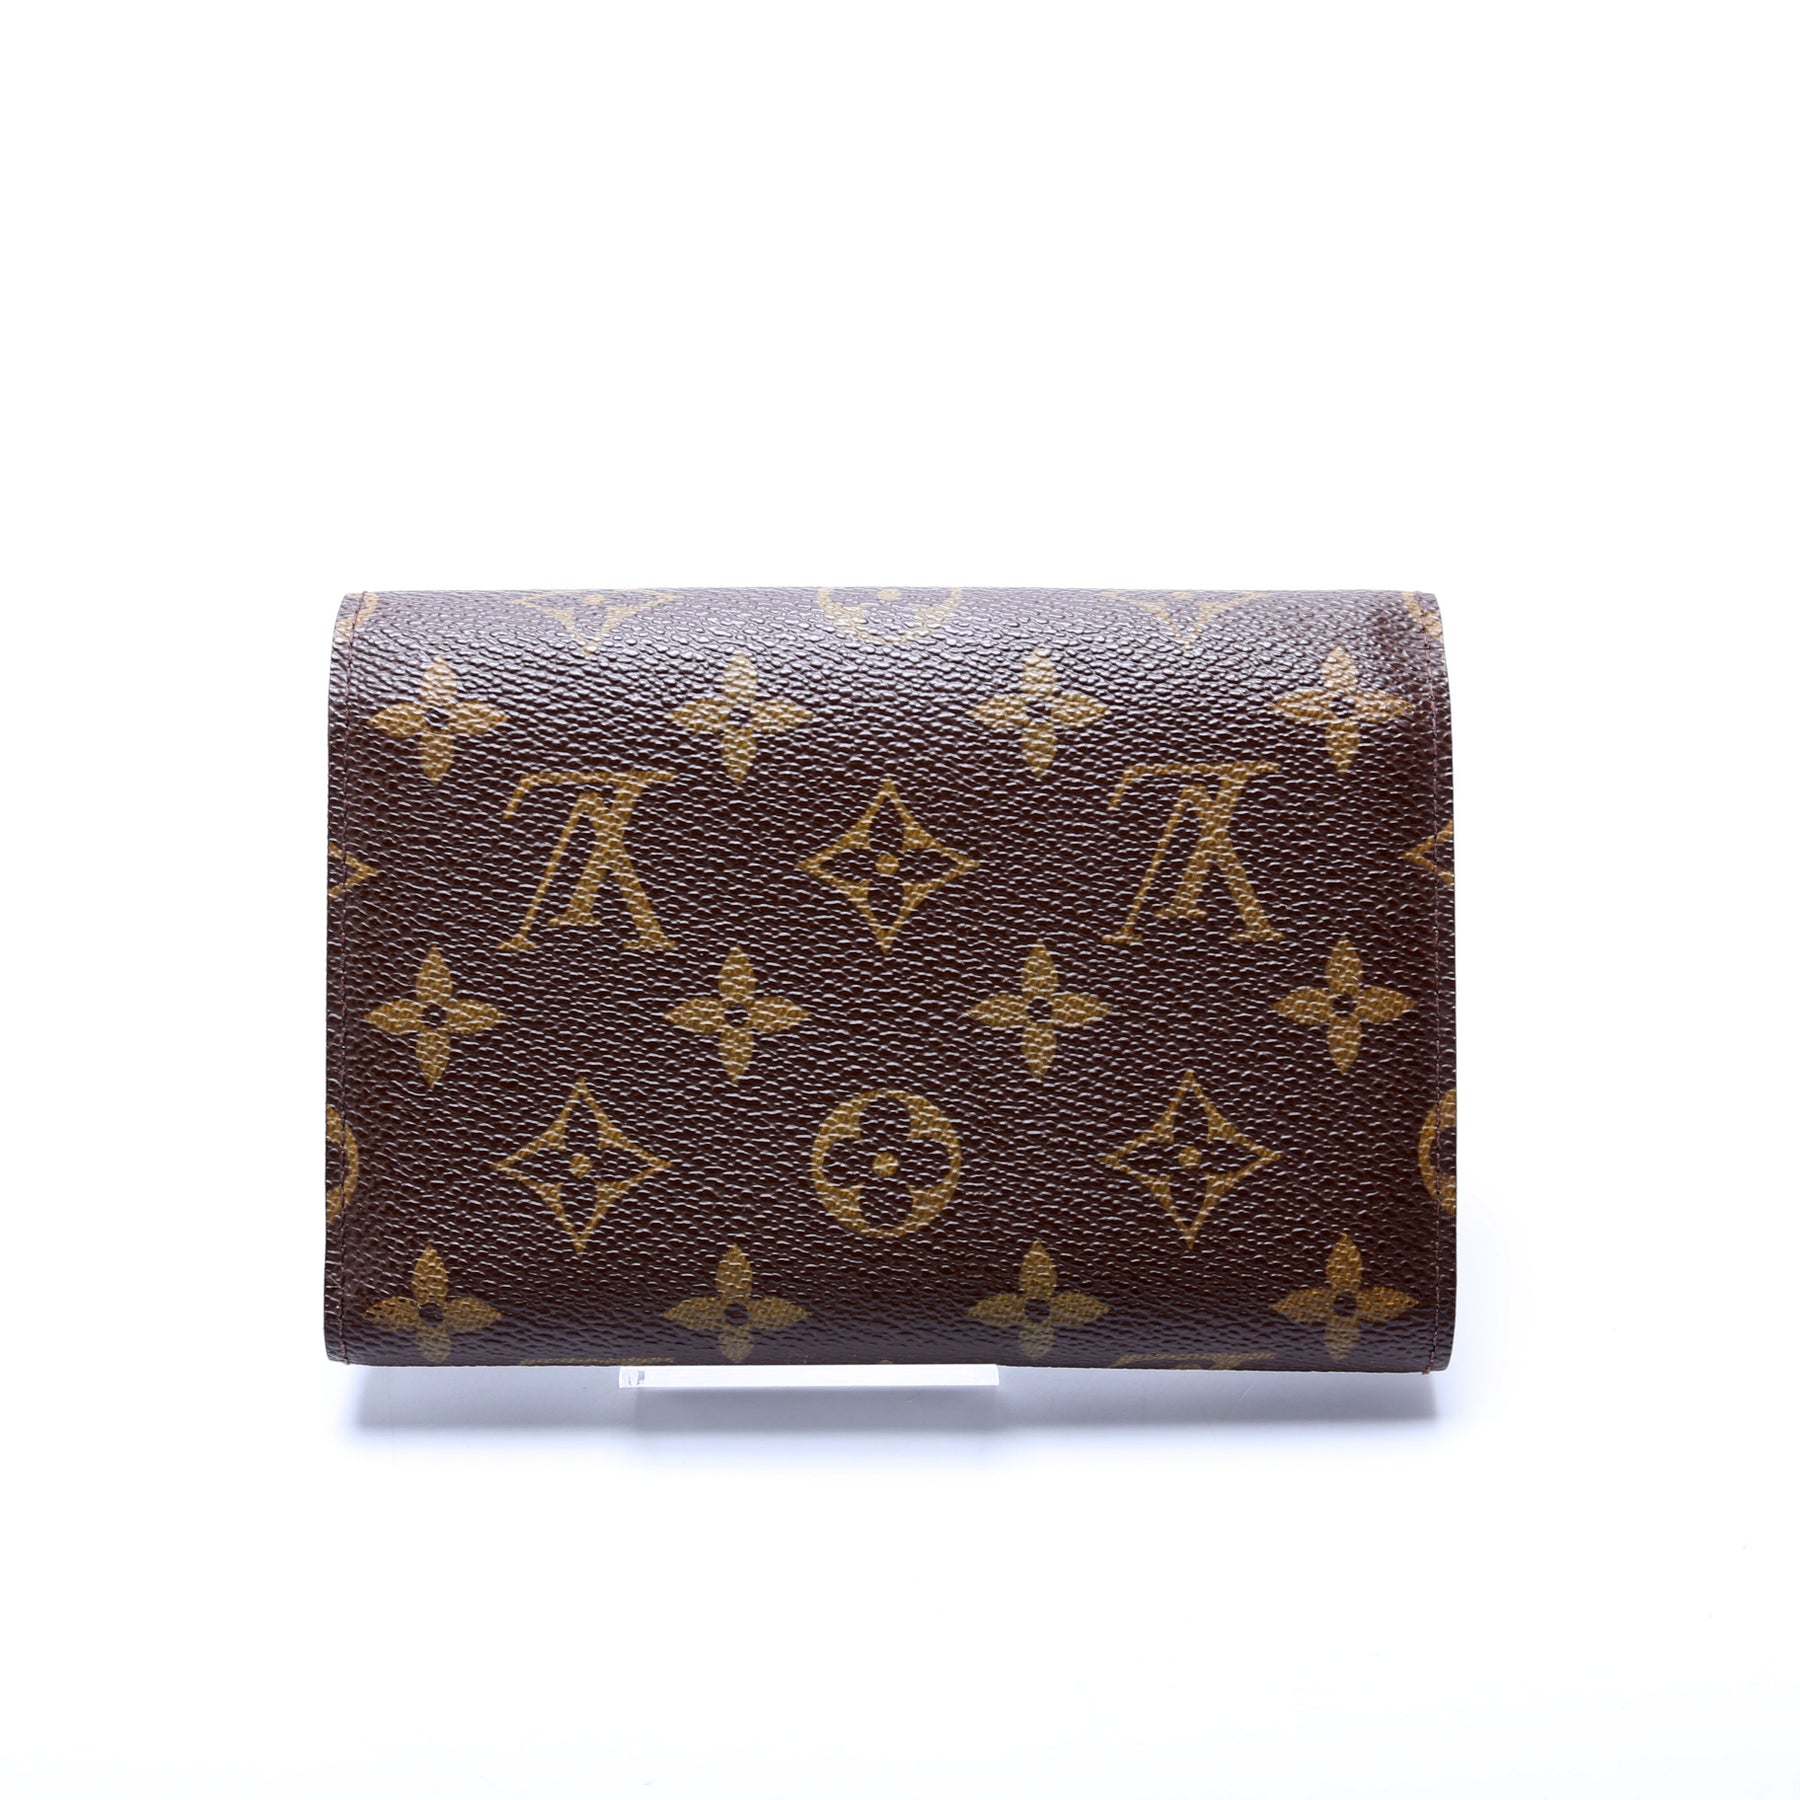 Louis Vuitton - Authenticated Alexandra Wallet - Leather Brown for Women, Good Condition